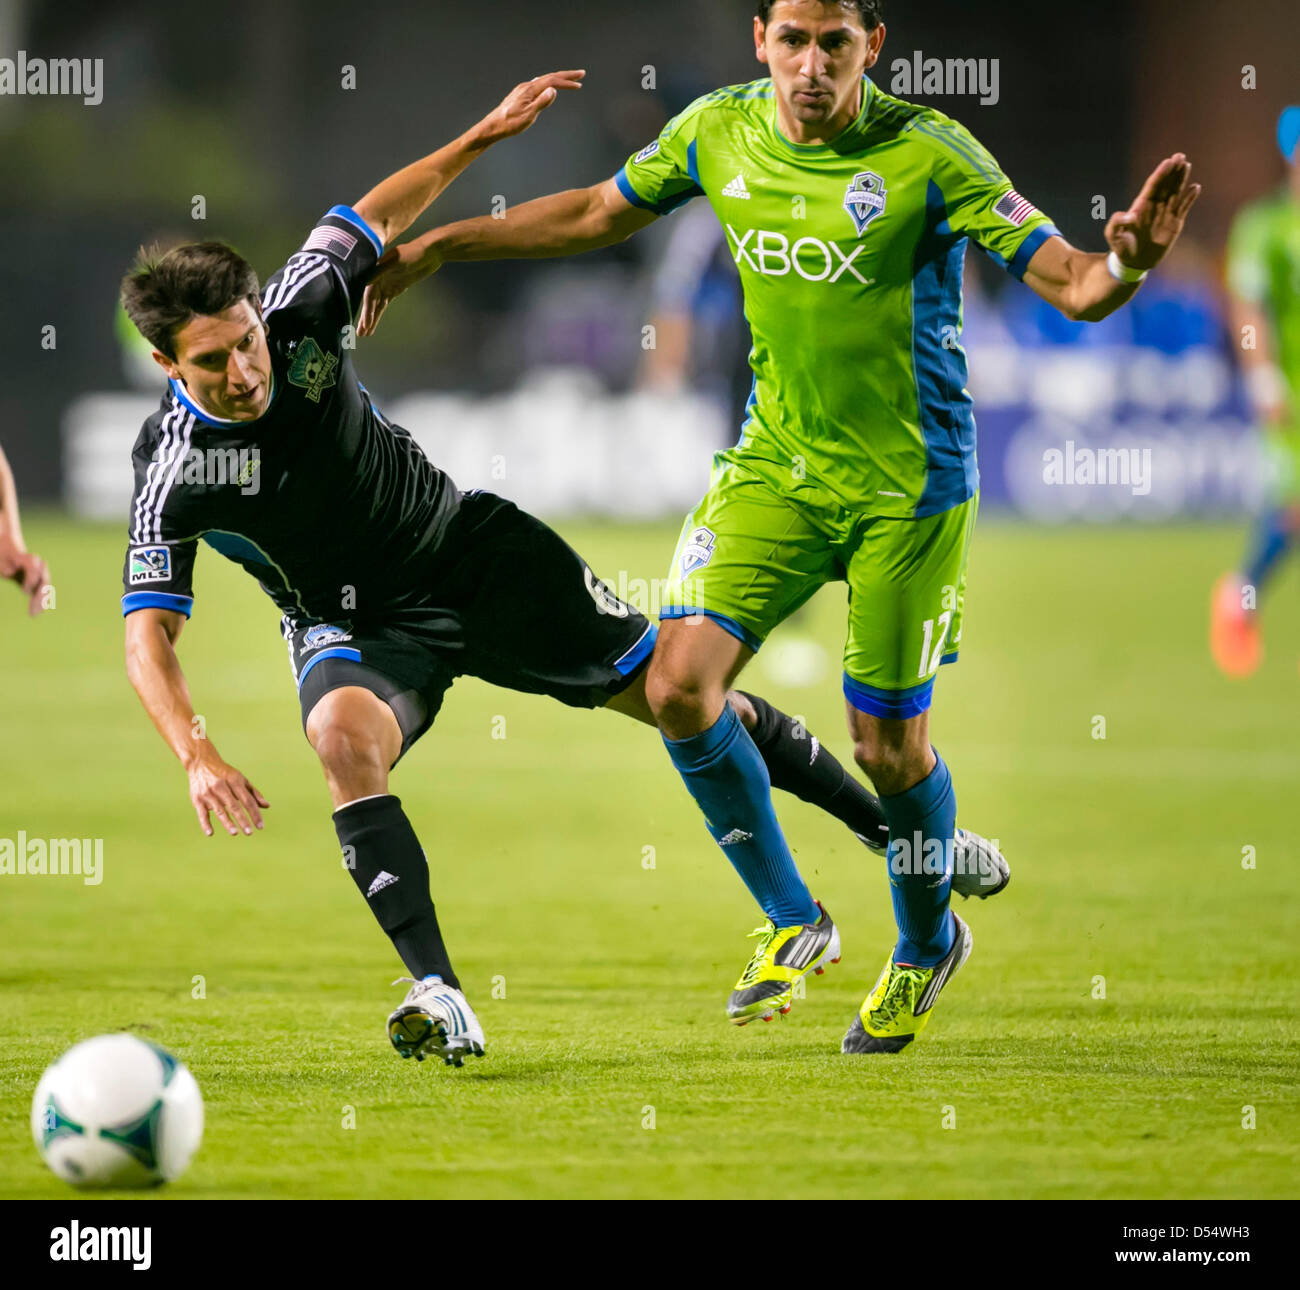 Santa Clara, California, USA. 23rd March 2013. Seattle Sounders defender Leo Gonzales (12) knocks San Jose Earthquakes midfielder Shea Salinas (6) off the ball during the the MLS game between the Seattle Sounders and the San Jose Earthquakes at Buck Shaw Stadium in Santa Clara CA. San Jose defeated Seattle 1-0. Credit:  Cal Sport Media / Alamy Live News Stock Photo